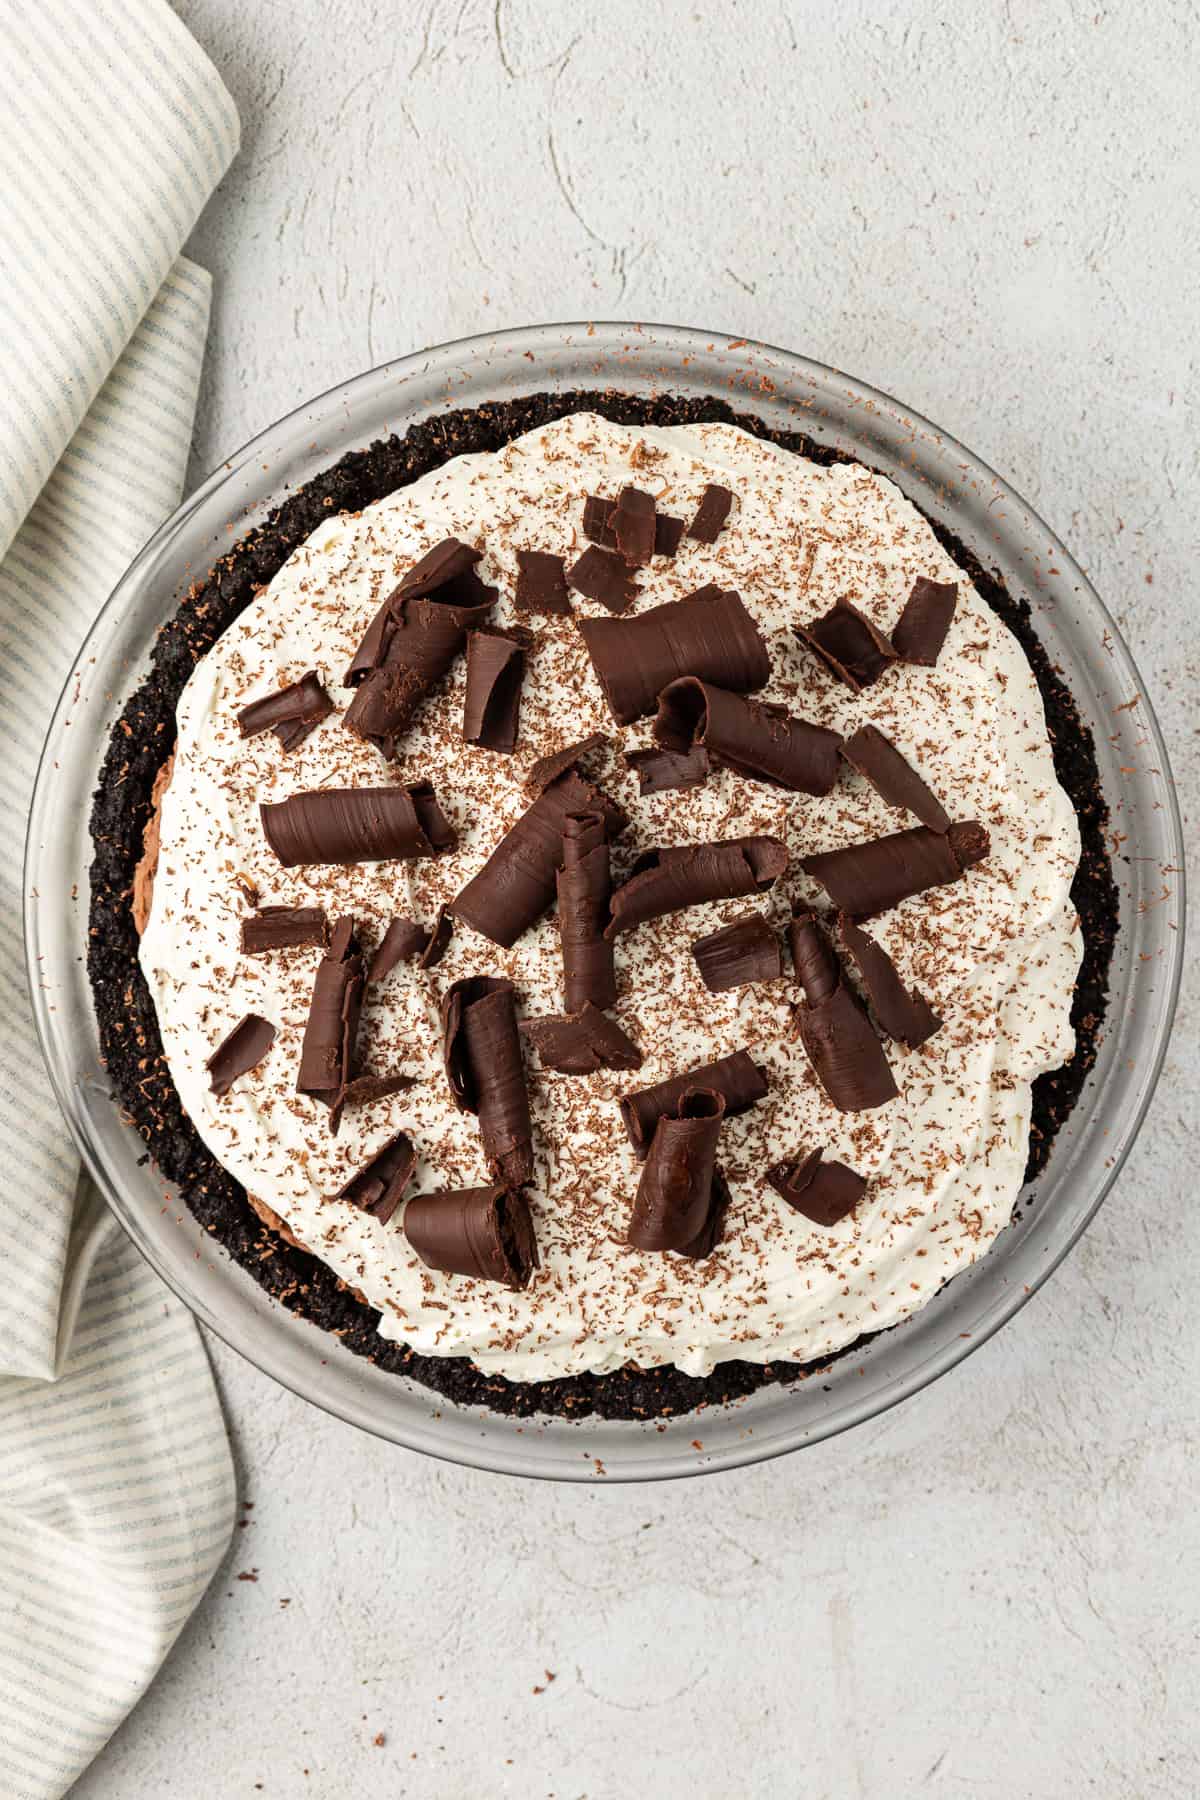 over head view of a mud pie topped with chocolate shavings